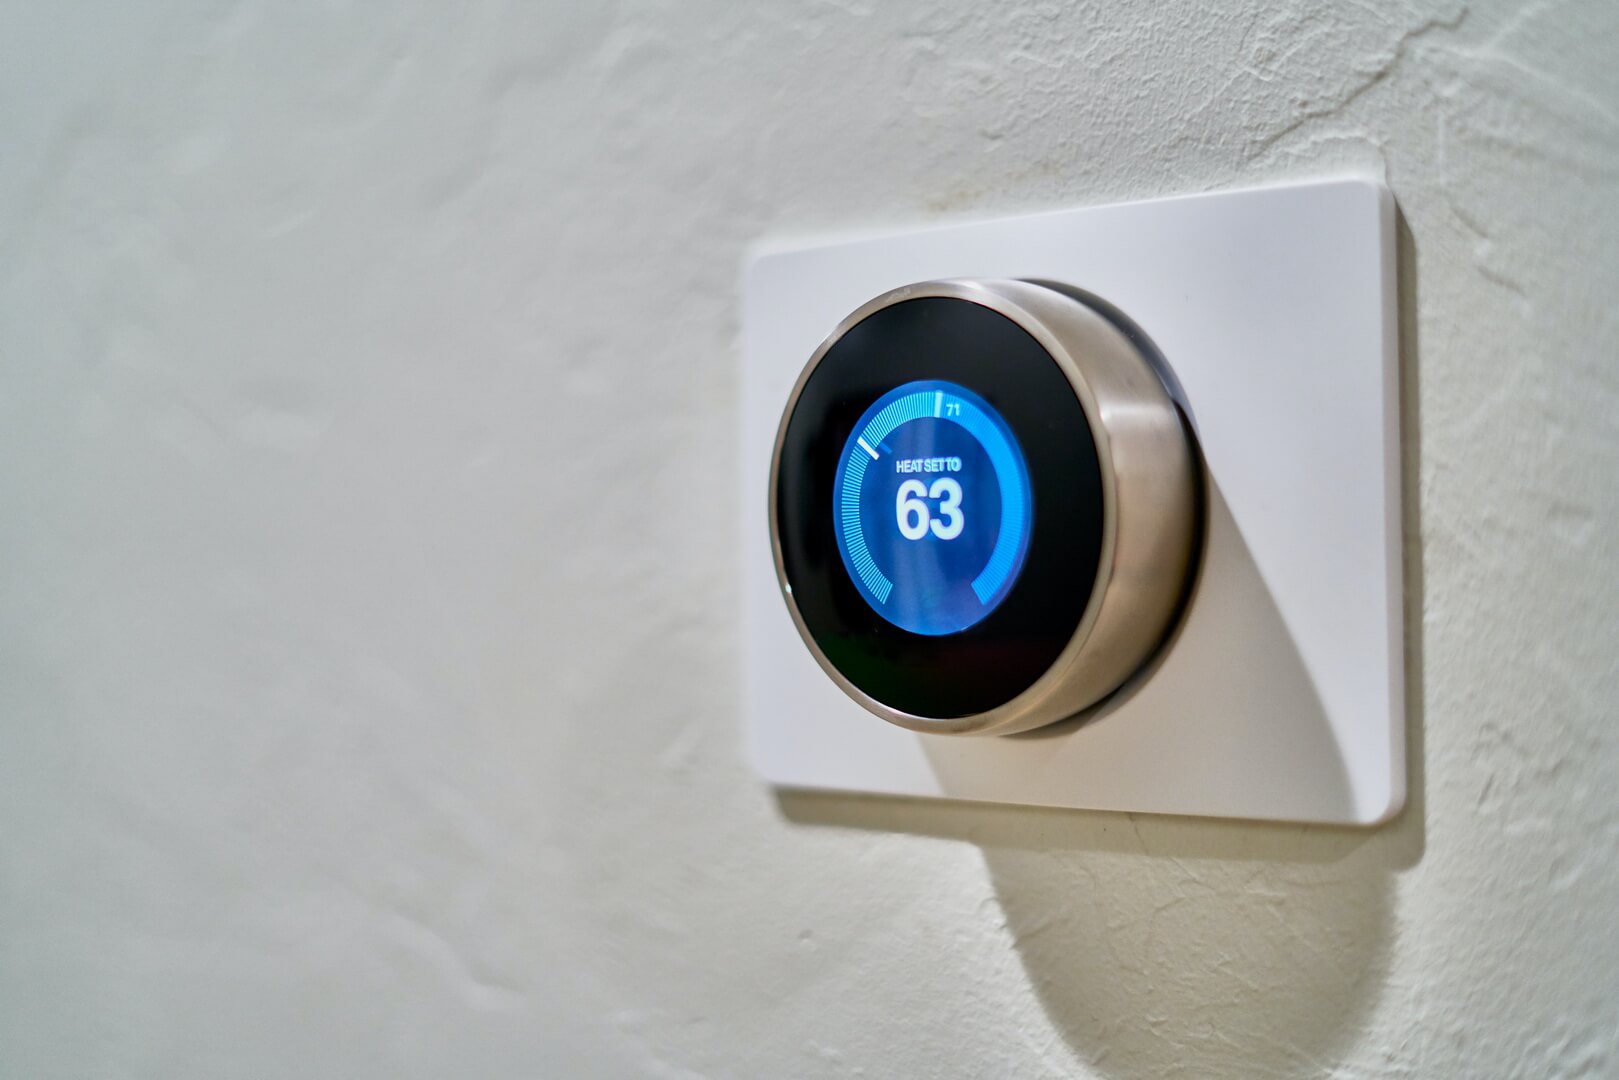 With Smart Thermostat You Will Be able to Control Temperature Better